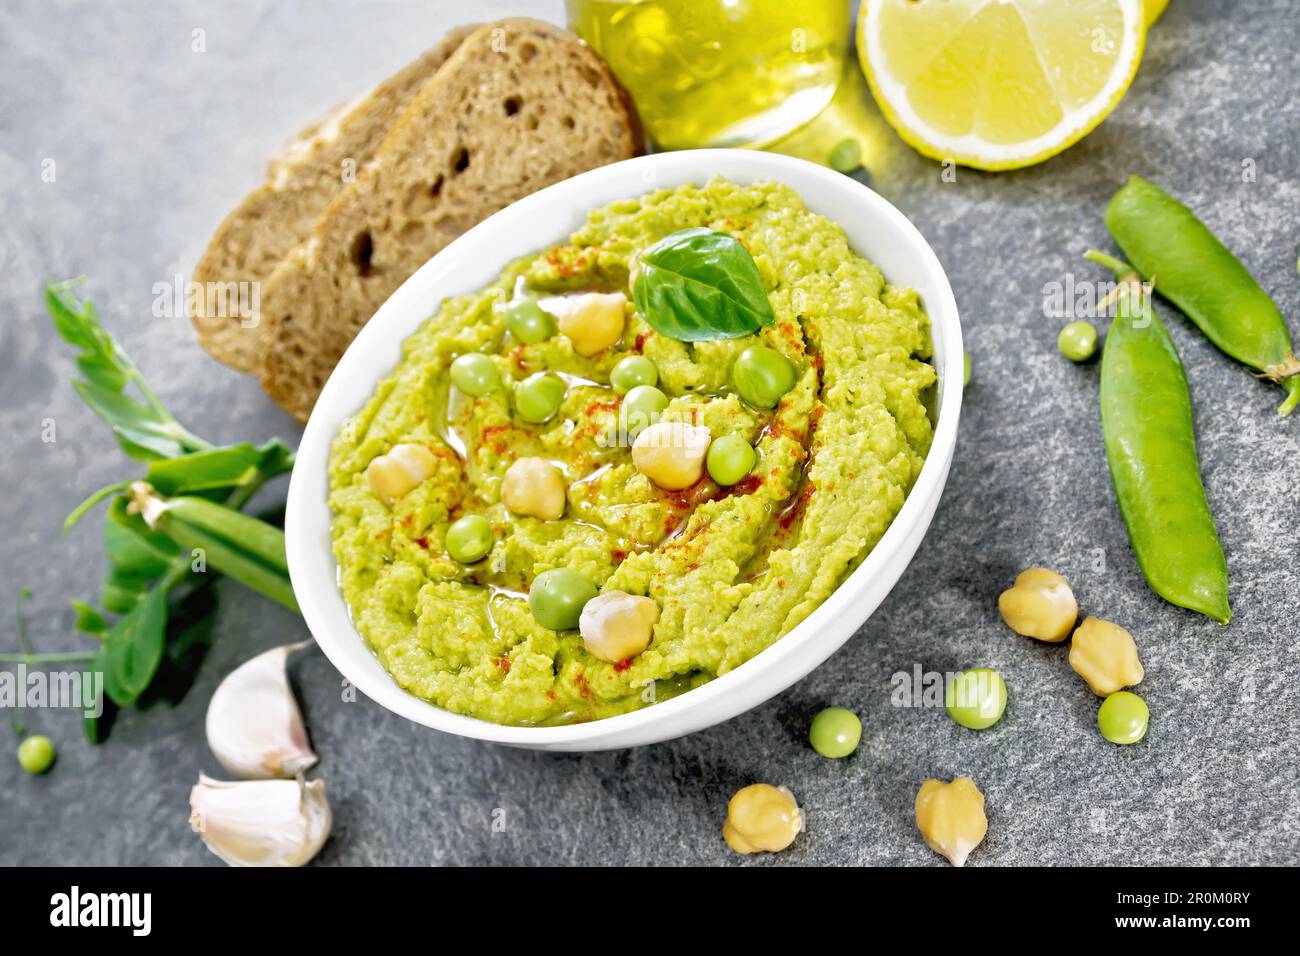 Hummus from green peas and chickpeas in a bowl, pea pods, lemon, garlic, vegetable oil in a decanter and slices of bread on granite countertop backgro Stock Photo